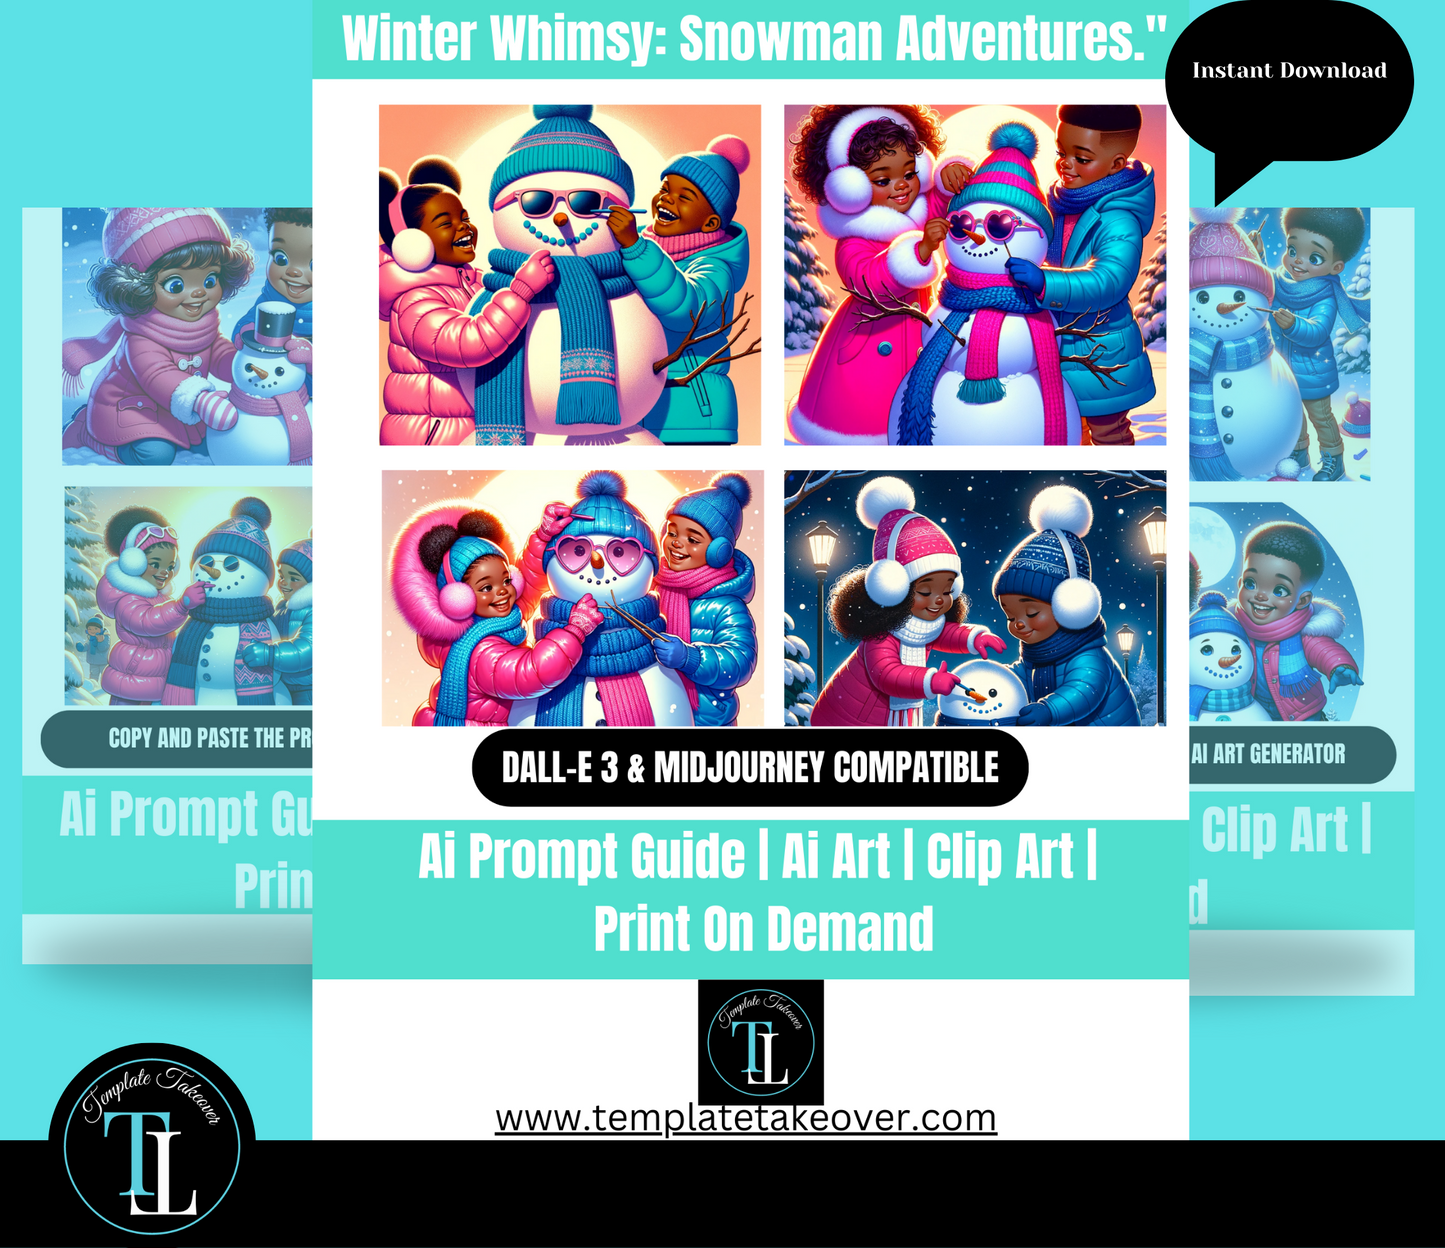 "Winter Whimsy Snowman Adventures"